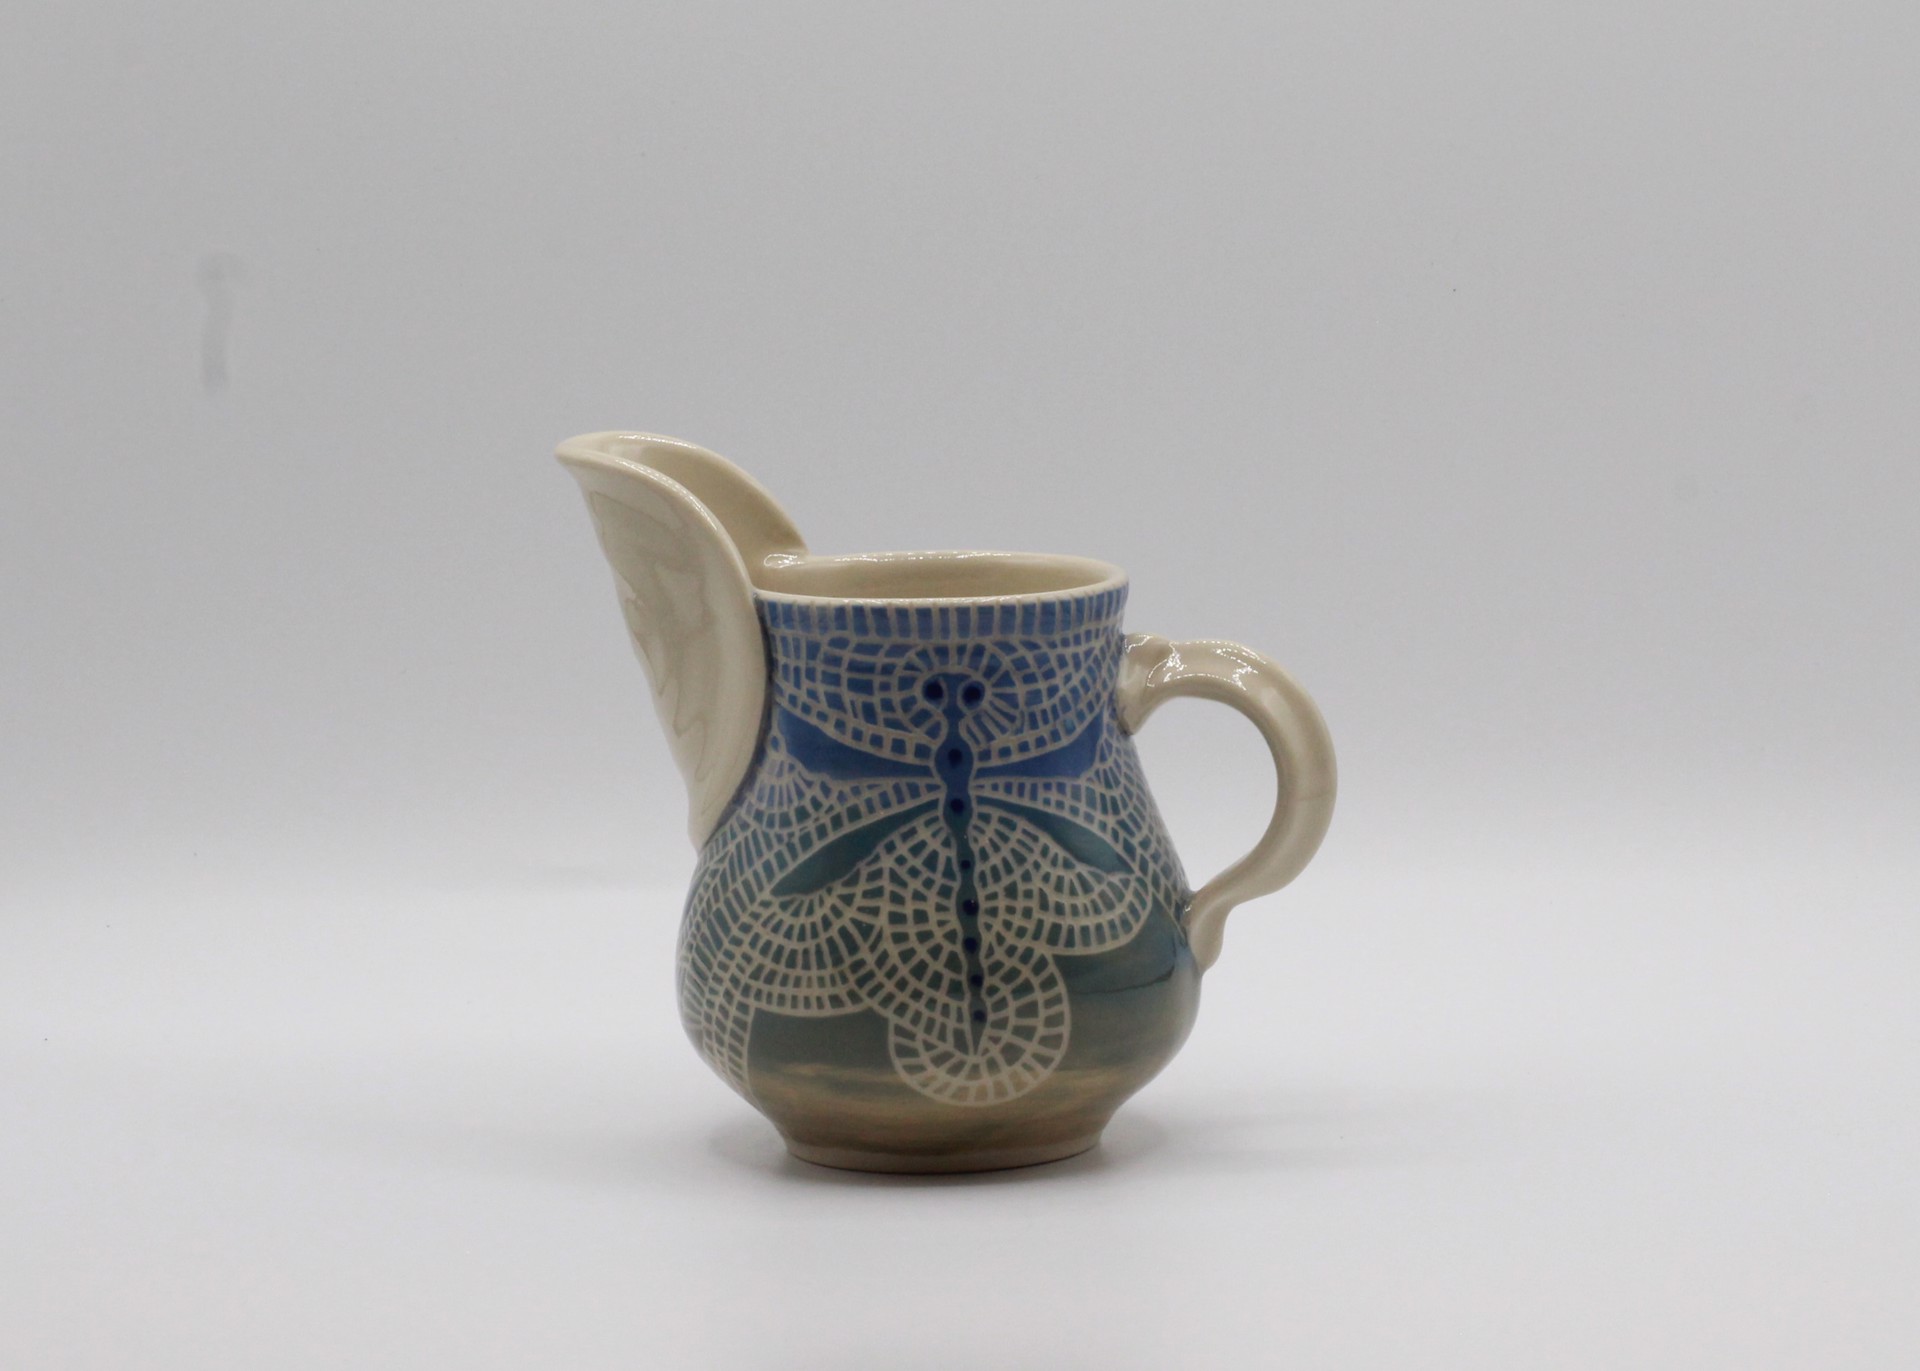 Dragonfly Creamer by Kelly Price